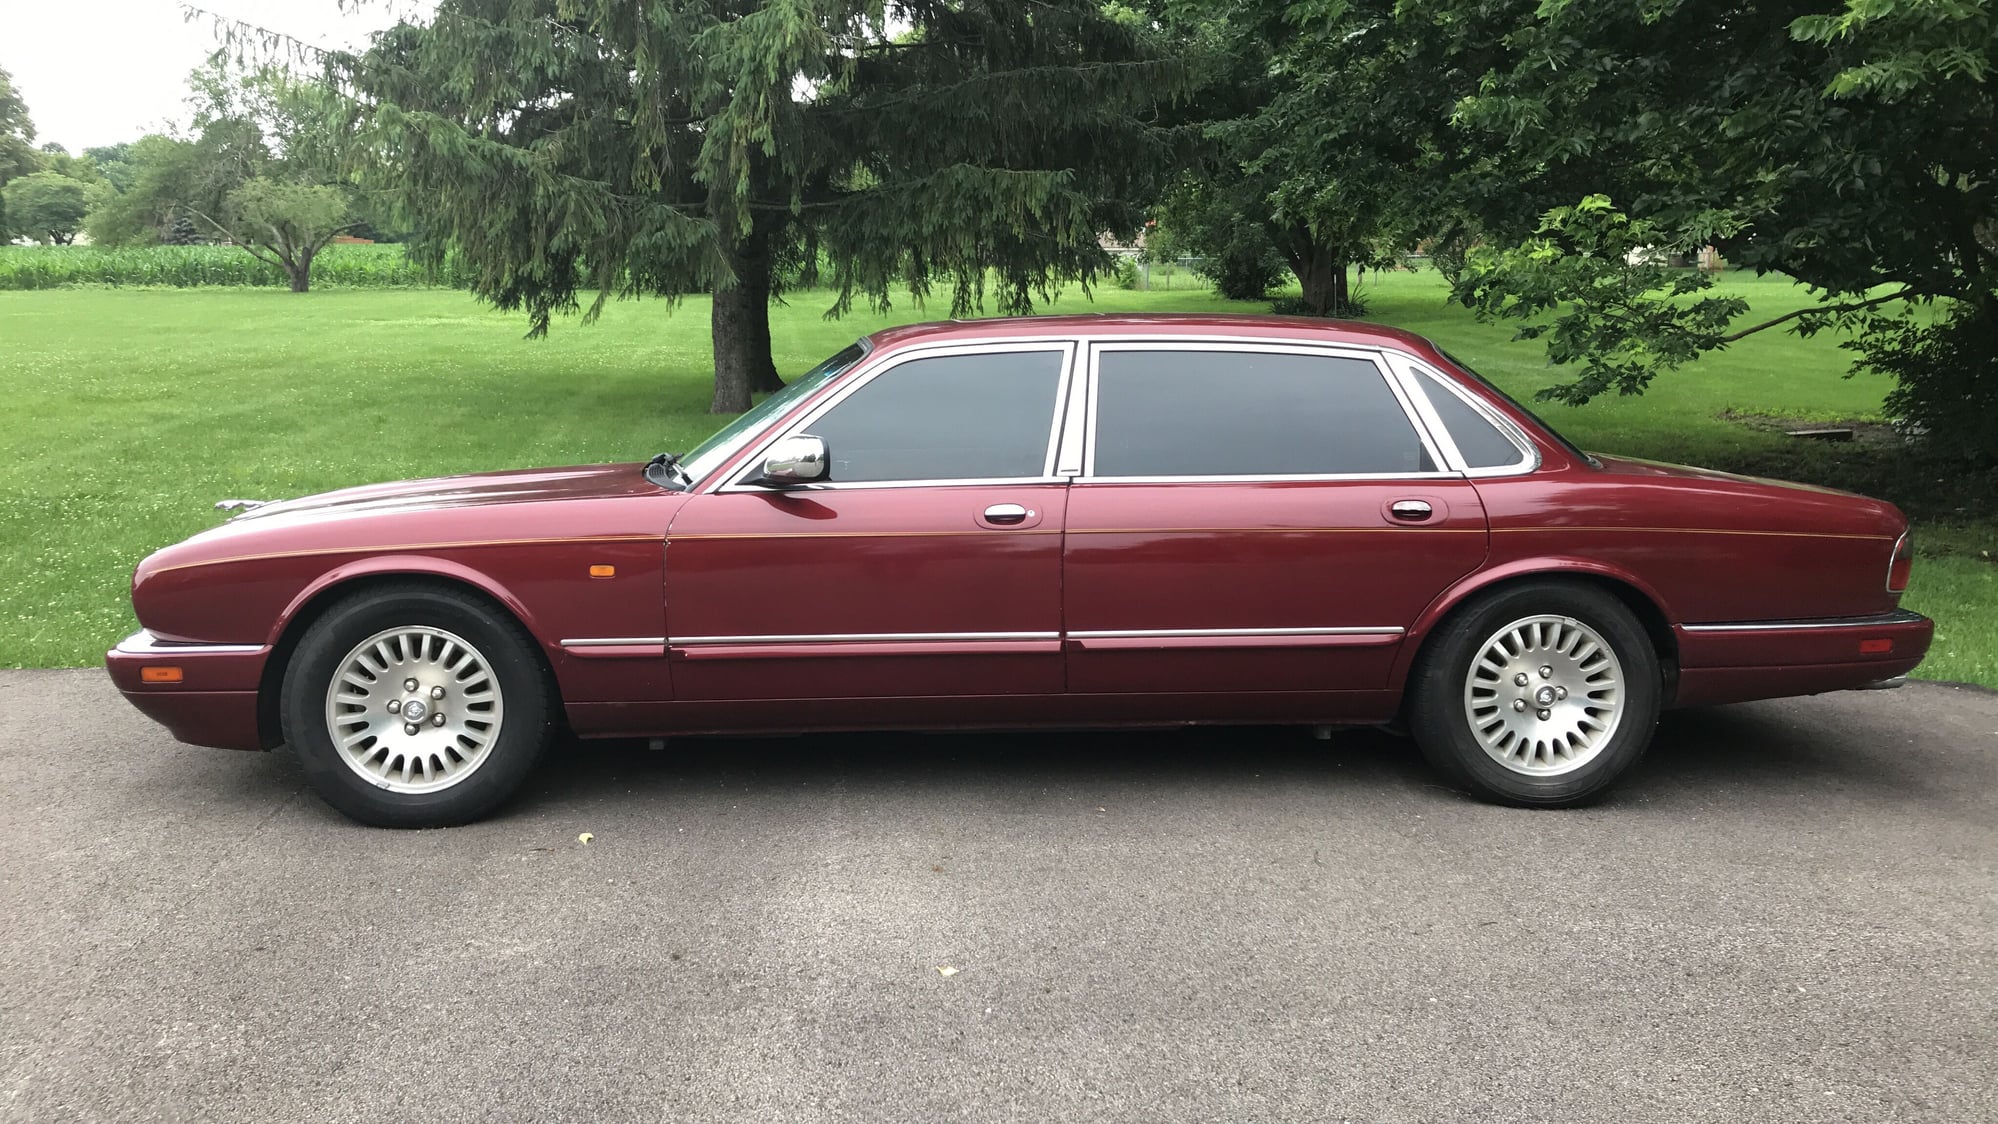 1997 Jaguar Vanden Plas - A good project car or for parts - Used - VIN SAJKX6247VC802186 - 232,000 Miles - 6 cyl - 2WD - Automatic - Sedan - Red - St. Joseph, IL 61873, United States